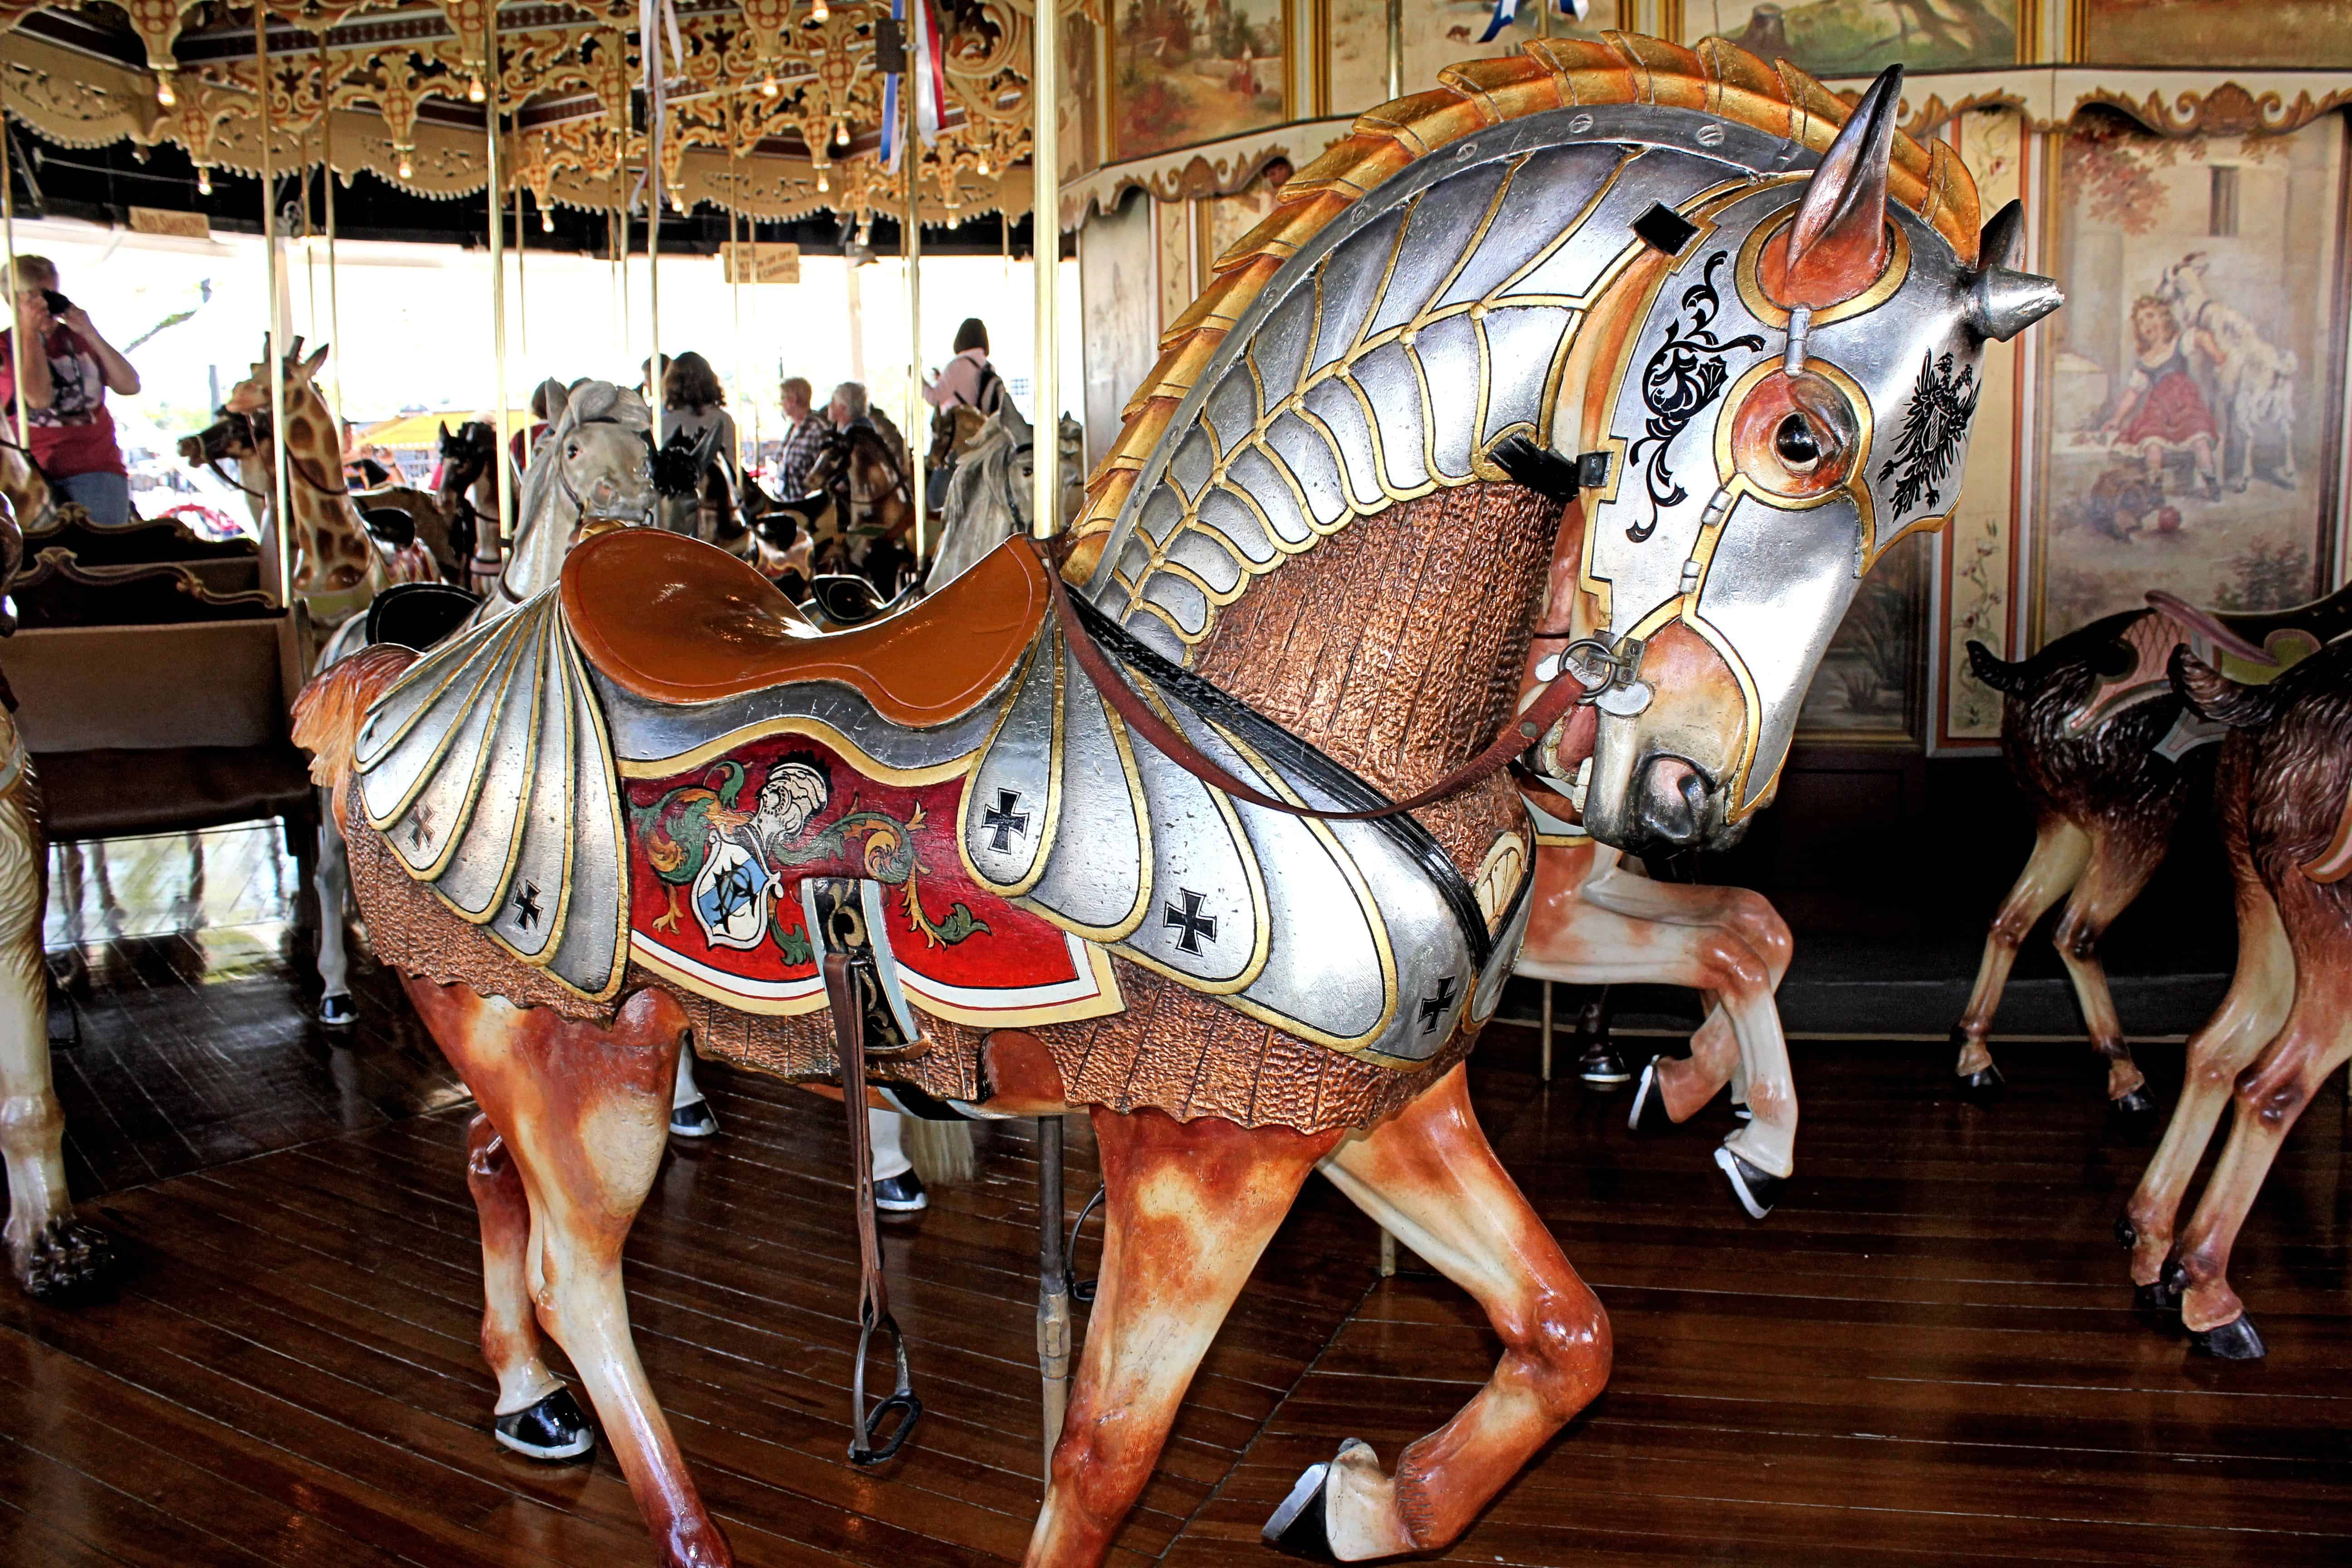 Kit Carson County Carousel: Take a Ride on History